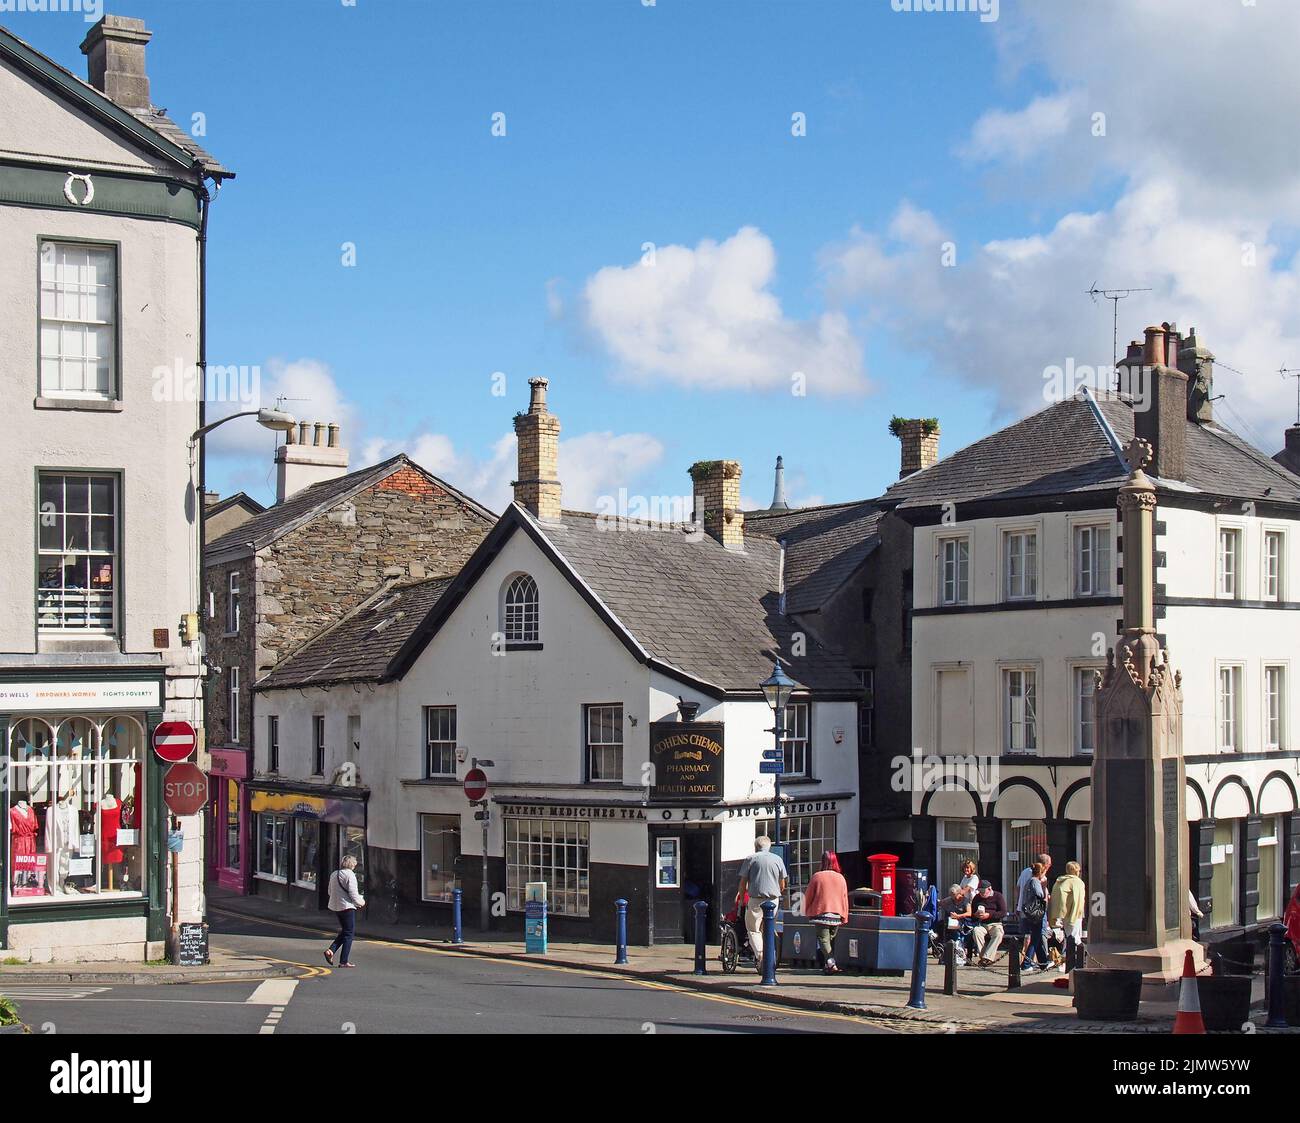 View of the town centre in ulverston cumbria with people walking past shops and war memorial Stock Photo